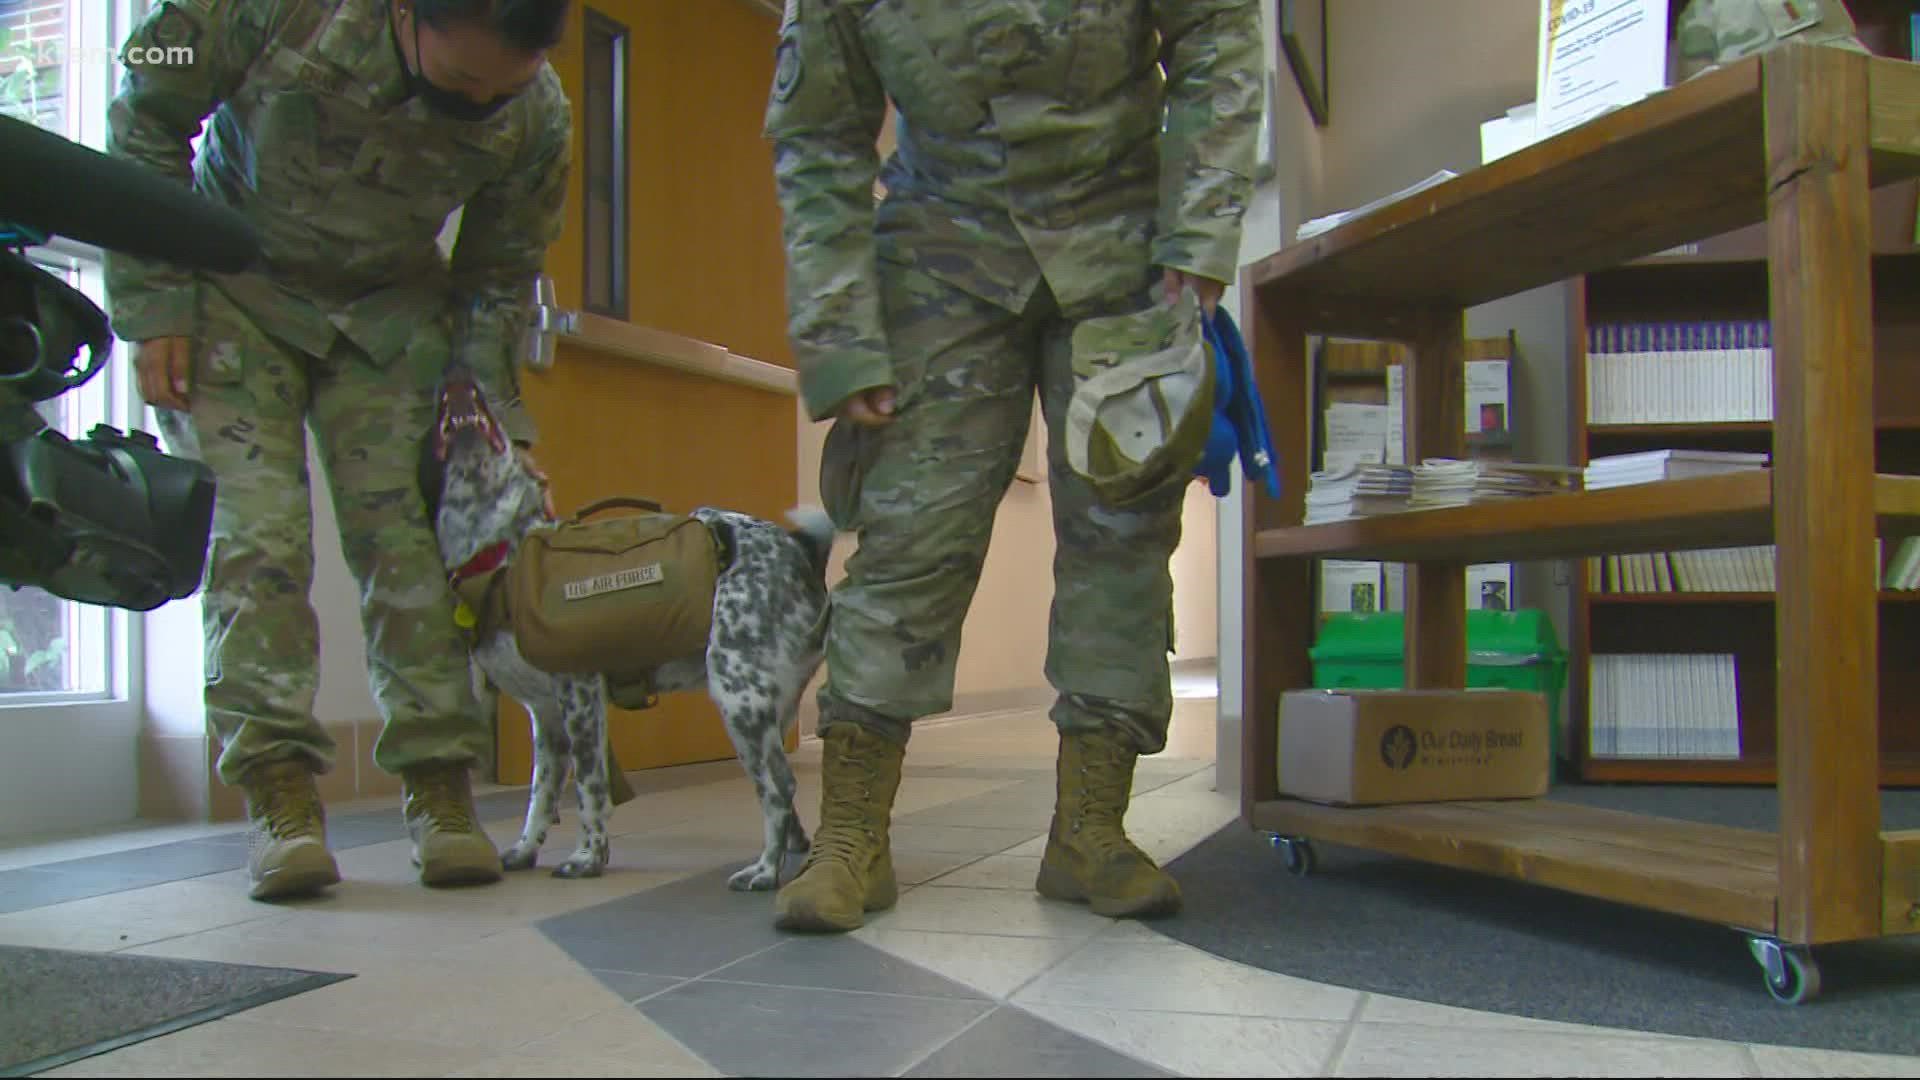 The dogs and their handlers work hard to practice protective skills for the Air Force base and the people who live there.